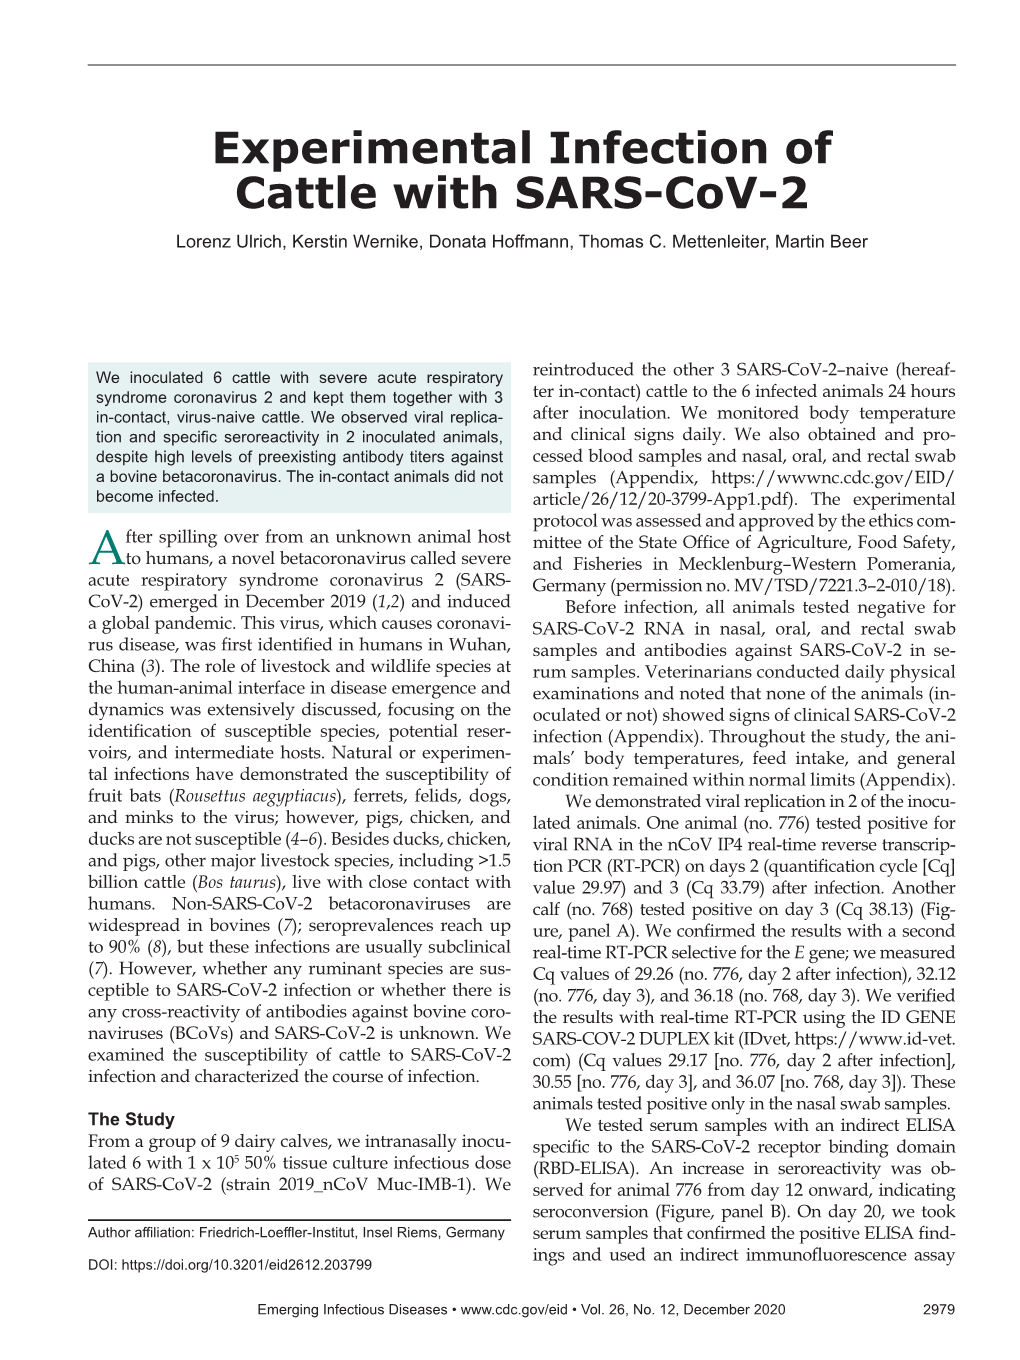 Experimental Infection of Cattle with SARS-Cov-2 Lorenz Ulrich, Kerstin Wernike, Donata Hoffmann, Thomas C